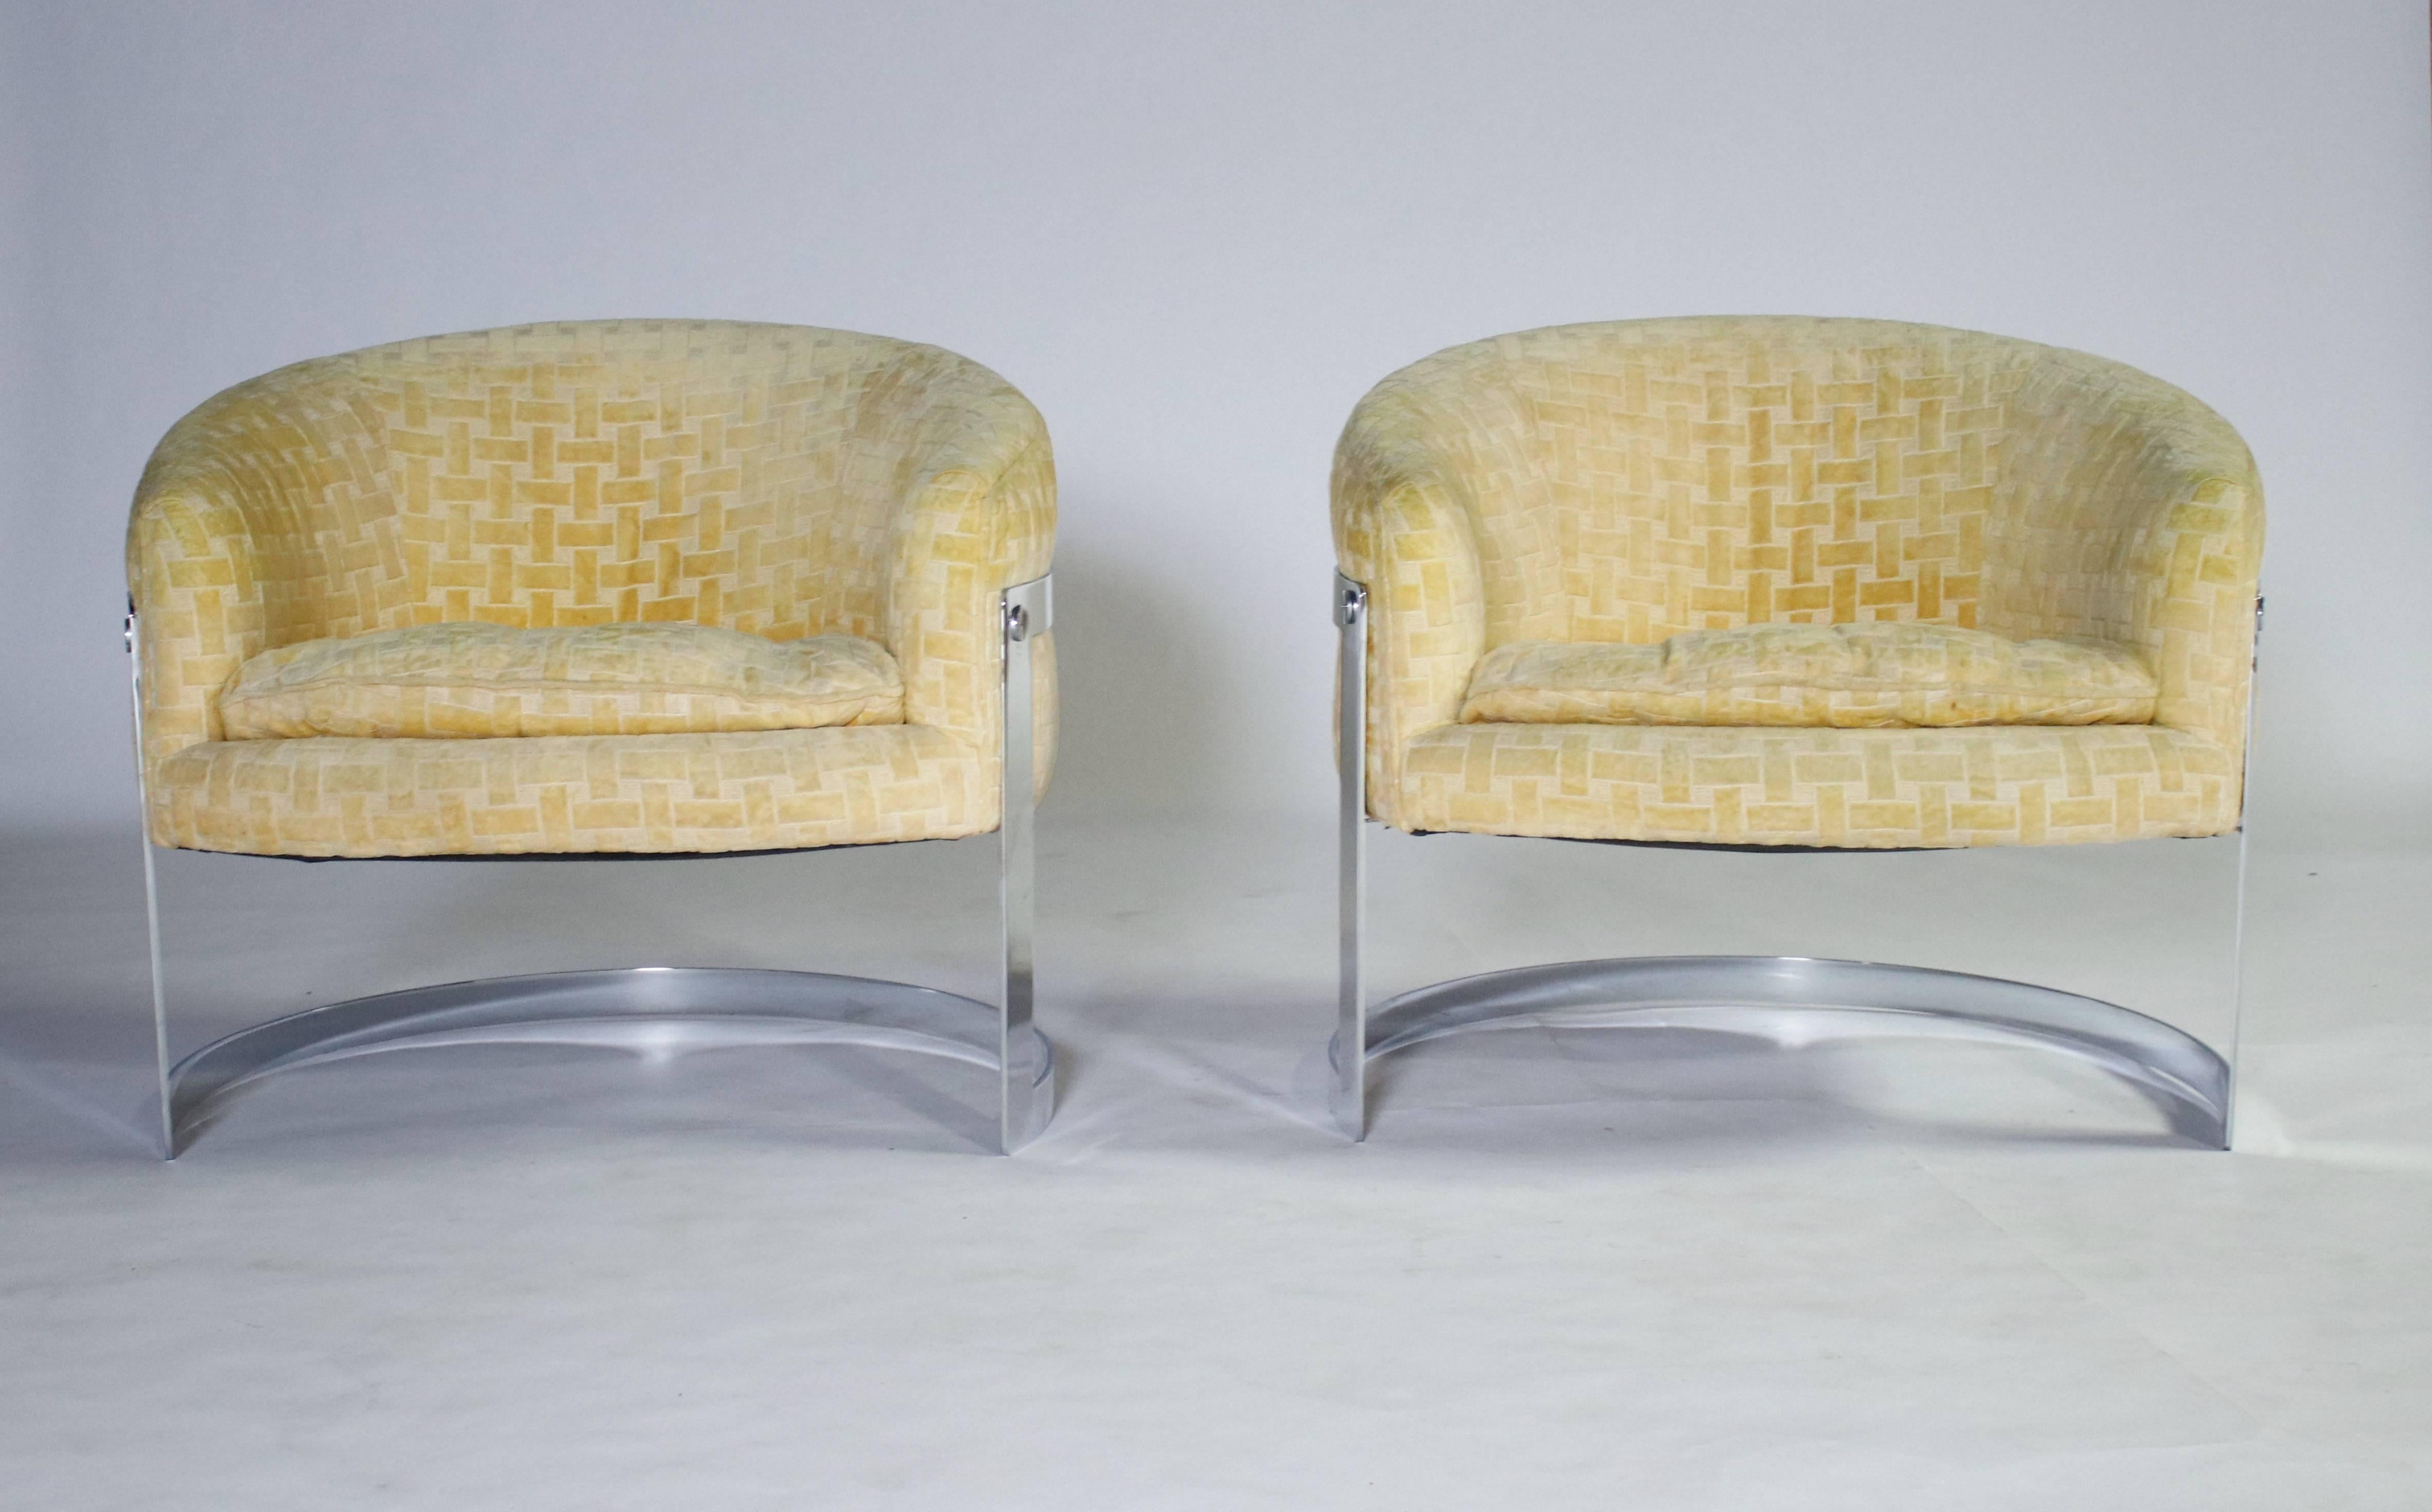 Milo Baughman chrome cantilevered barrel chairs in original yellow patterned fabric and removable cushions. Chrome in excellent condition and all screw heads intact. Chairs are very sturdy and good as is or reupholstered in your choice of fabric.